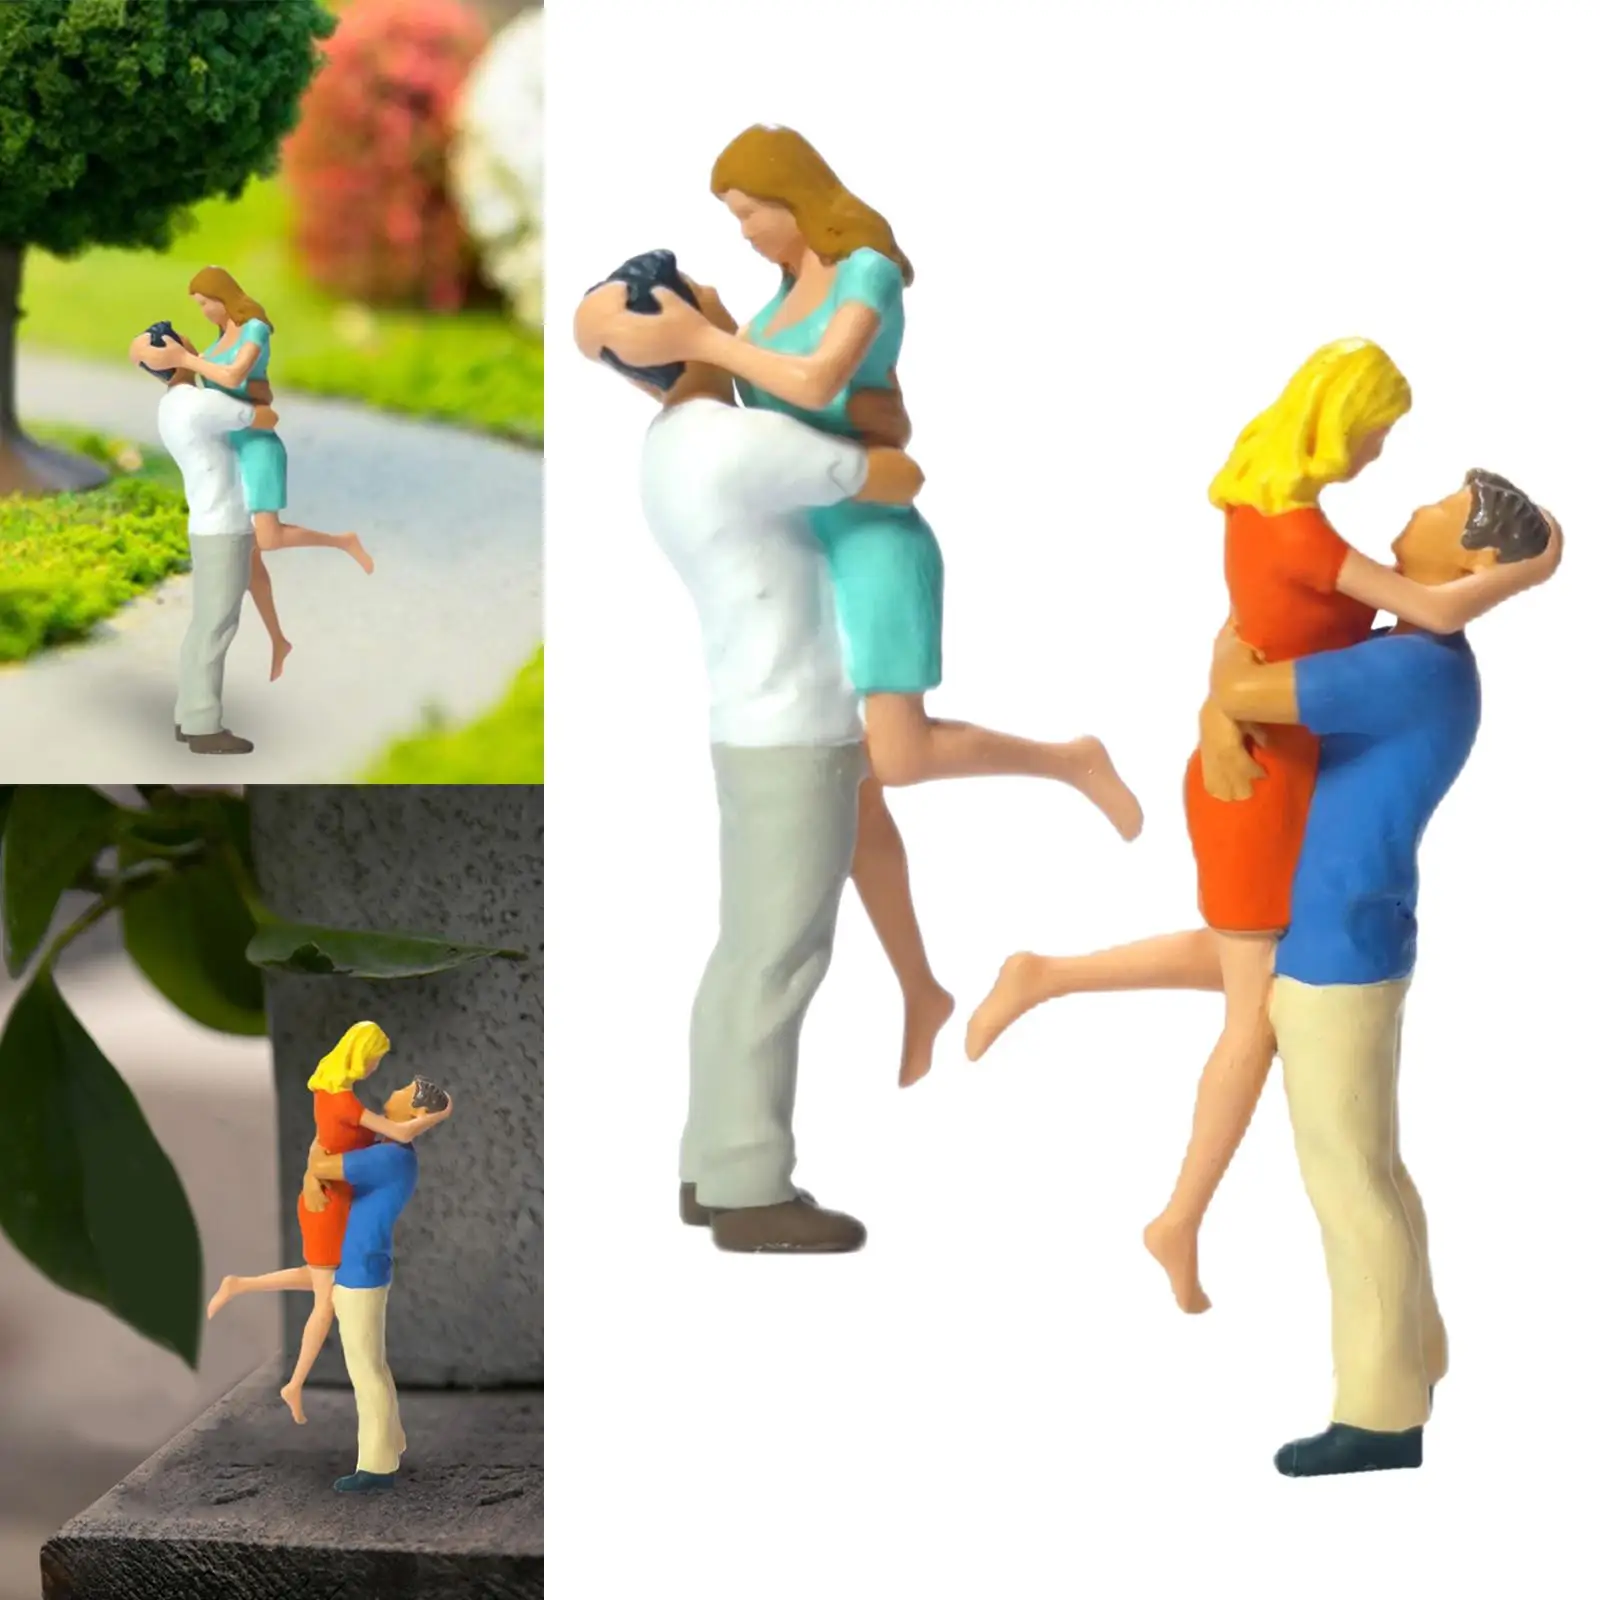 Resin 1/64 Hugging Couple Model Figure Miniature Collection Character Figure for Miniature Scene Photography Props Accessories